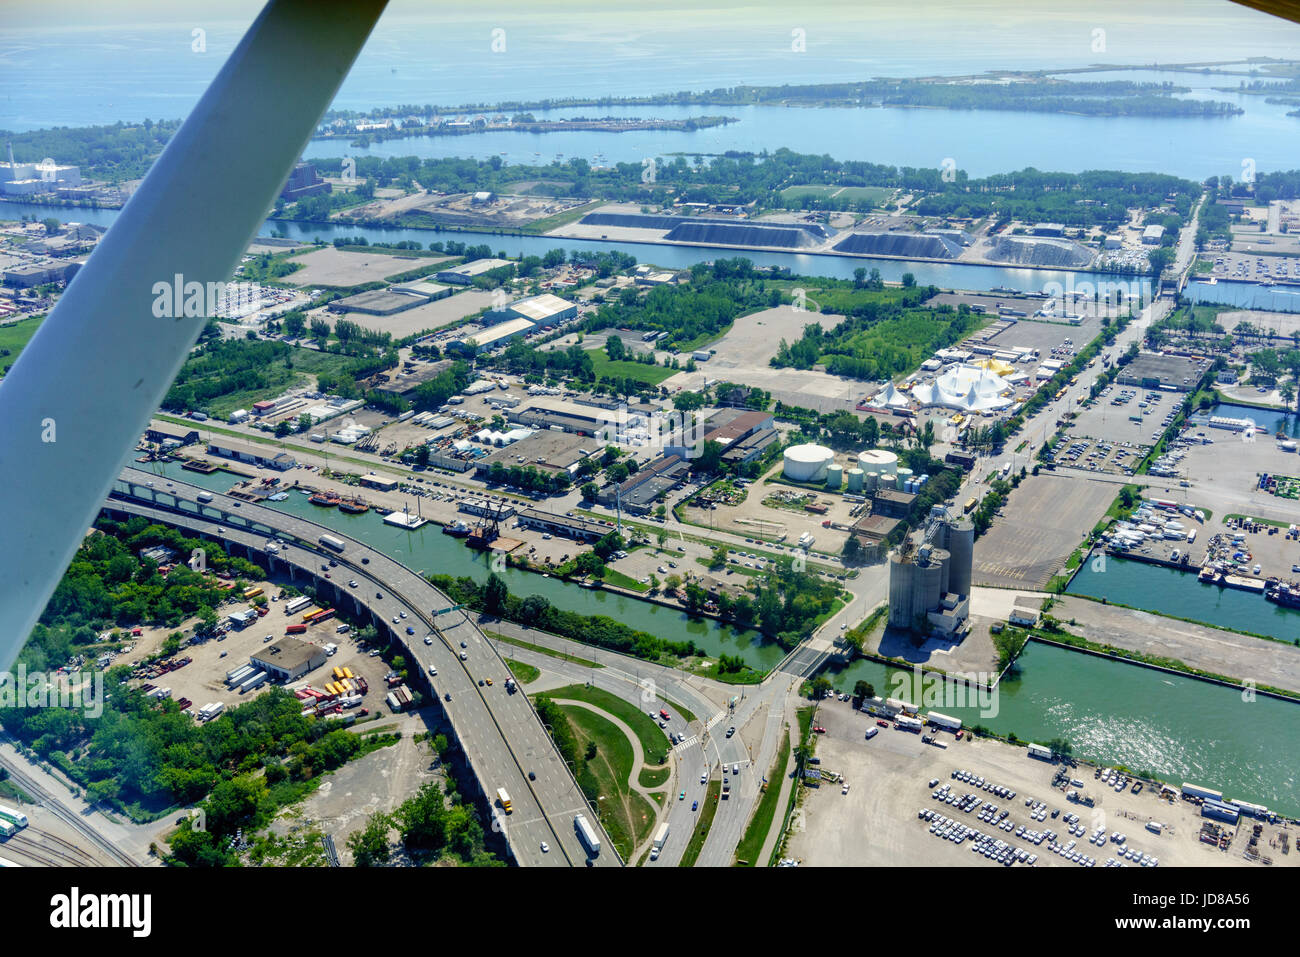 Aerial view at day of Toronto, Ontario, Canada from aeroplane. aerial picture from ontario canada 2016 Stock Photo